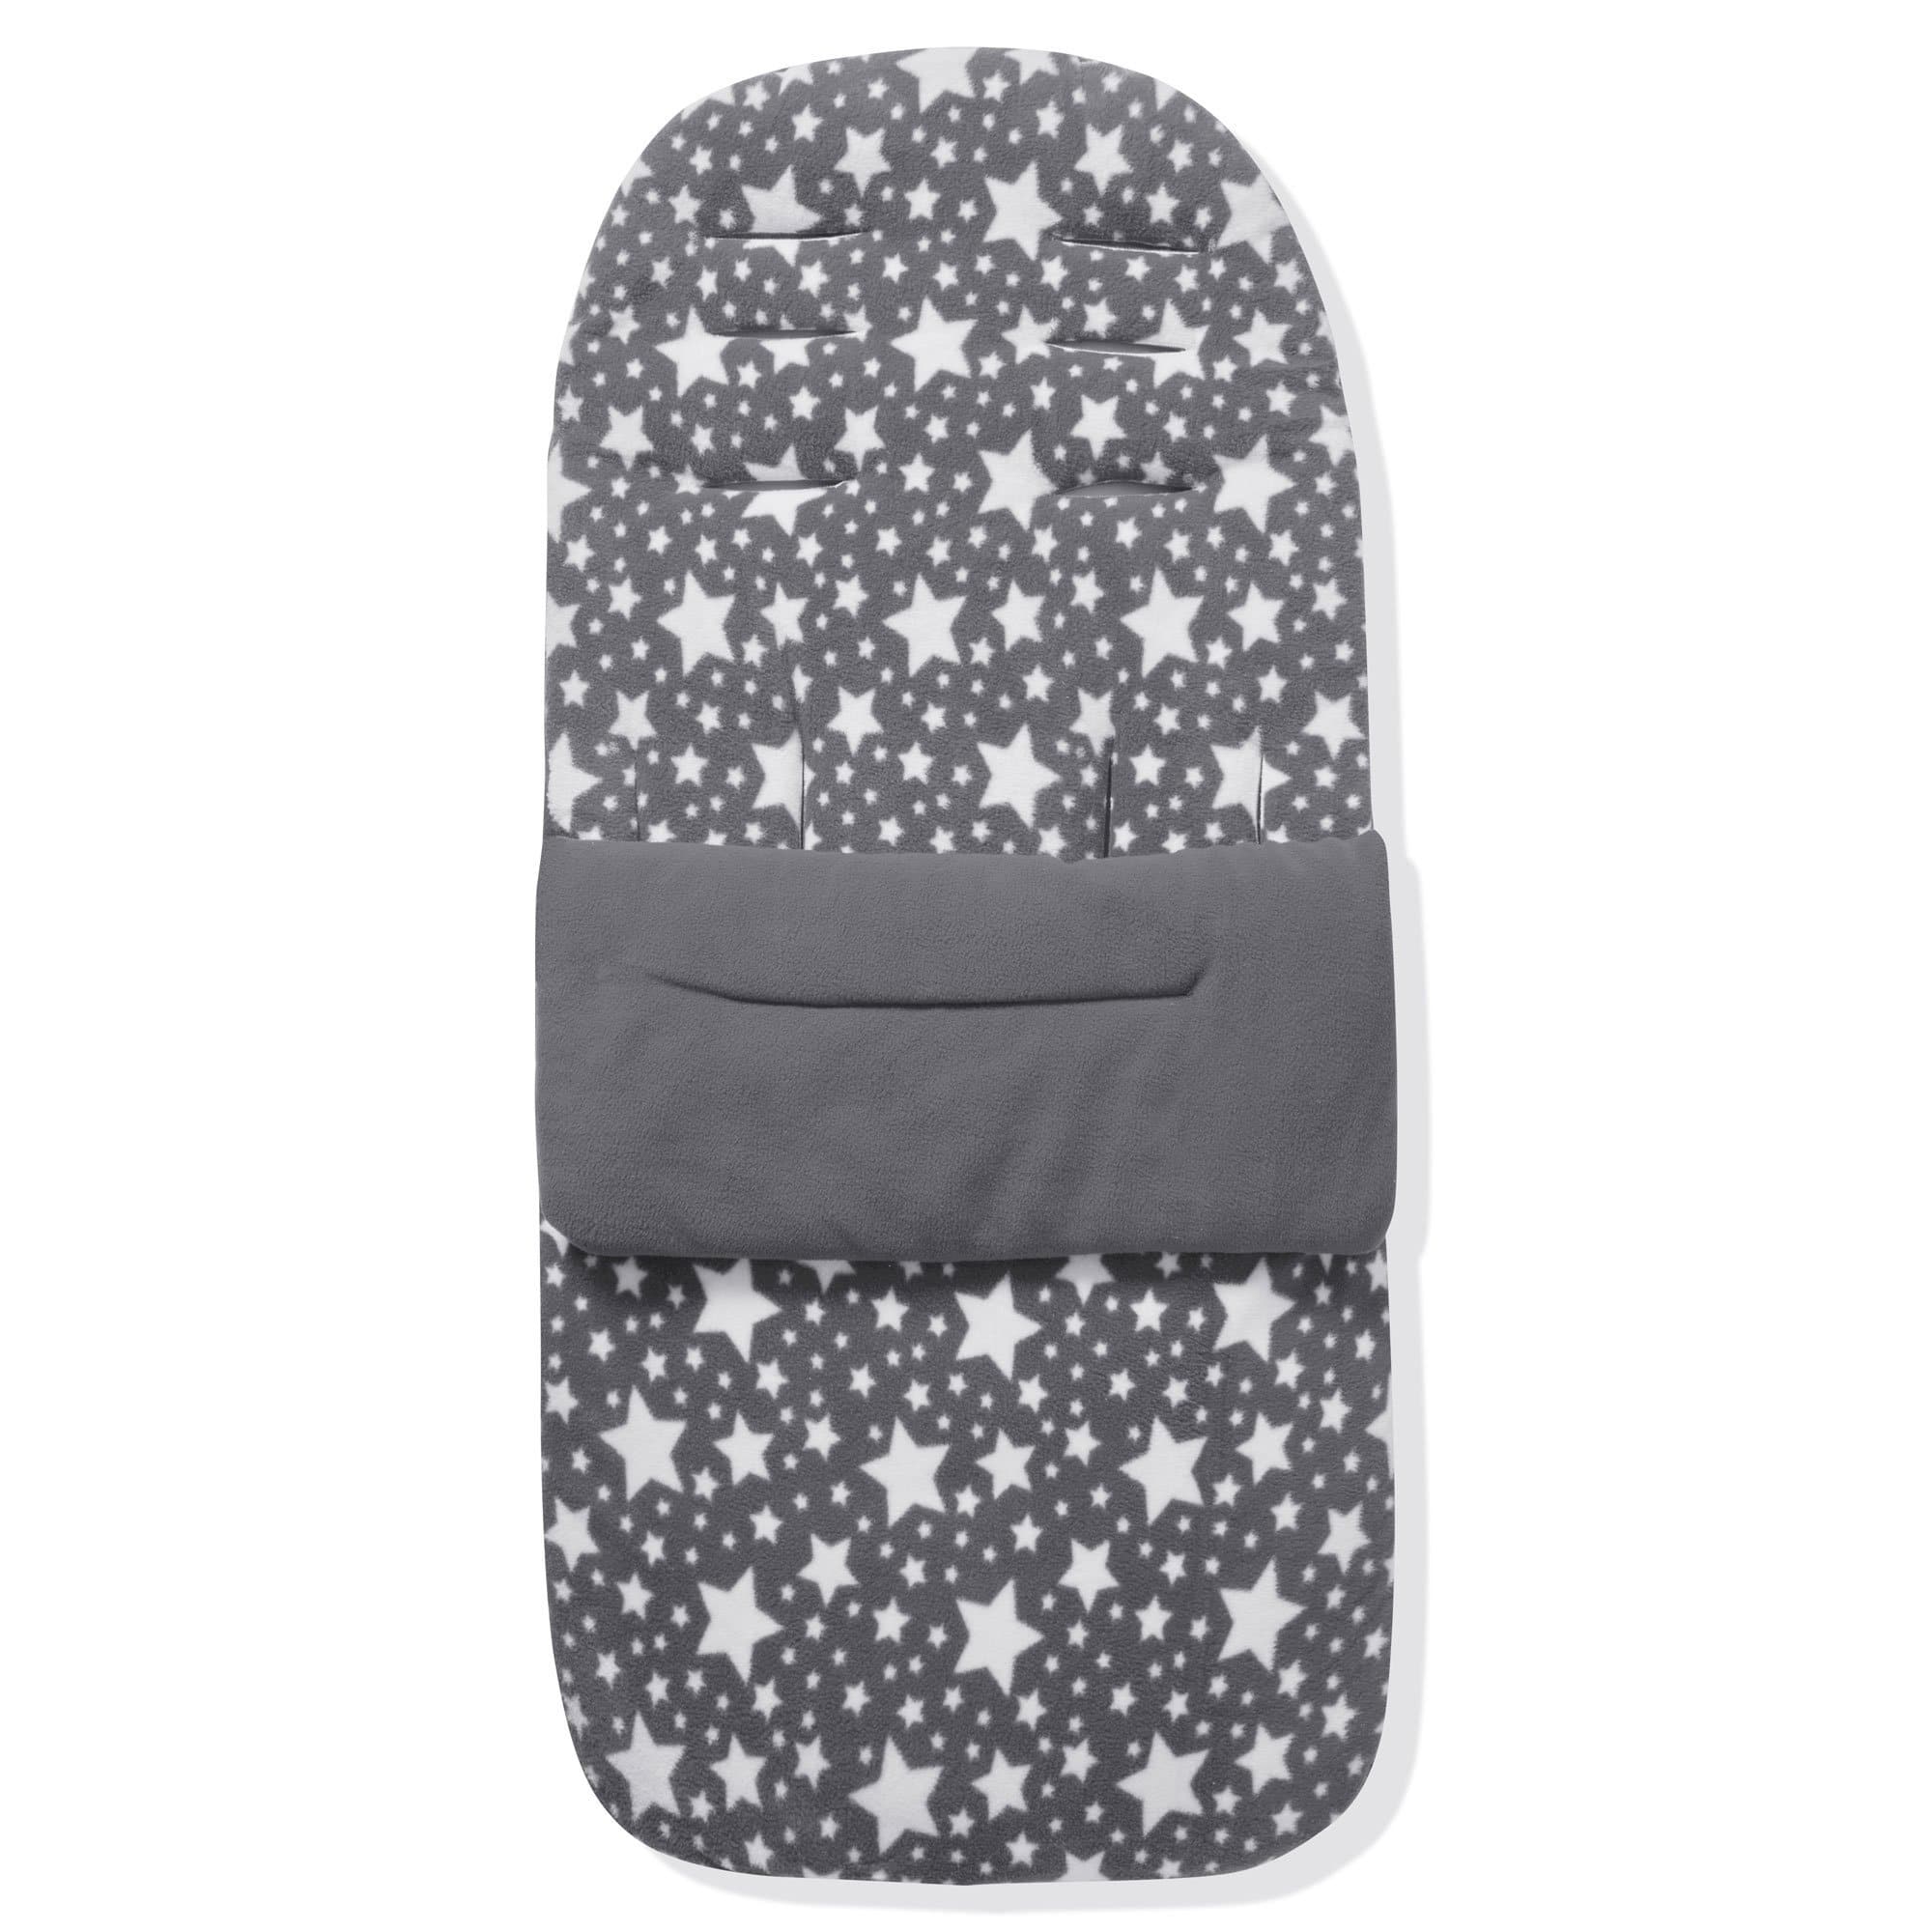 Fleece Footmuff / Cosy Toes Compatible with Joolz - Grey Star / Fits All Models | For Your Little One